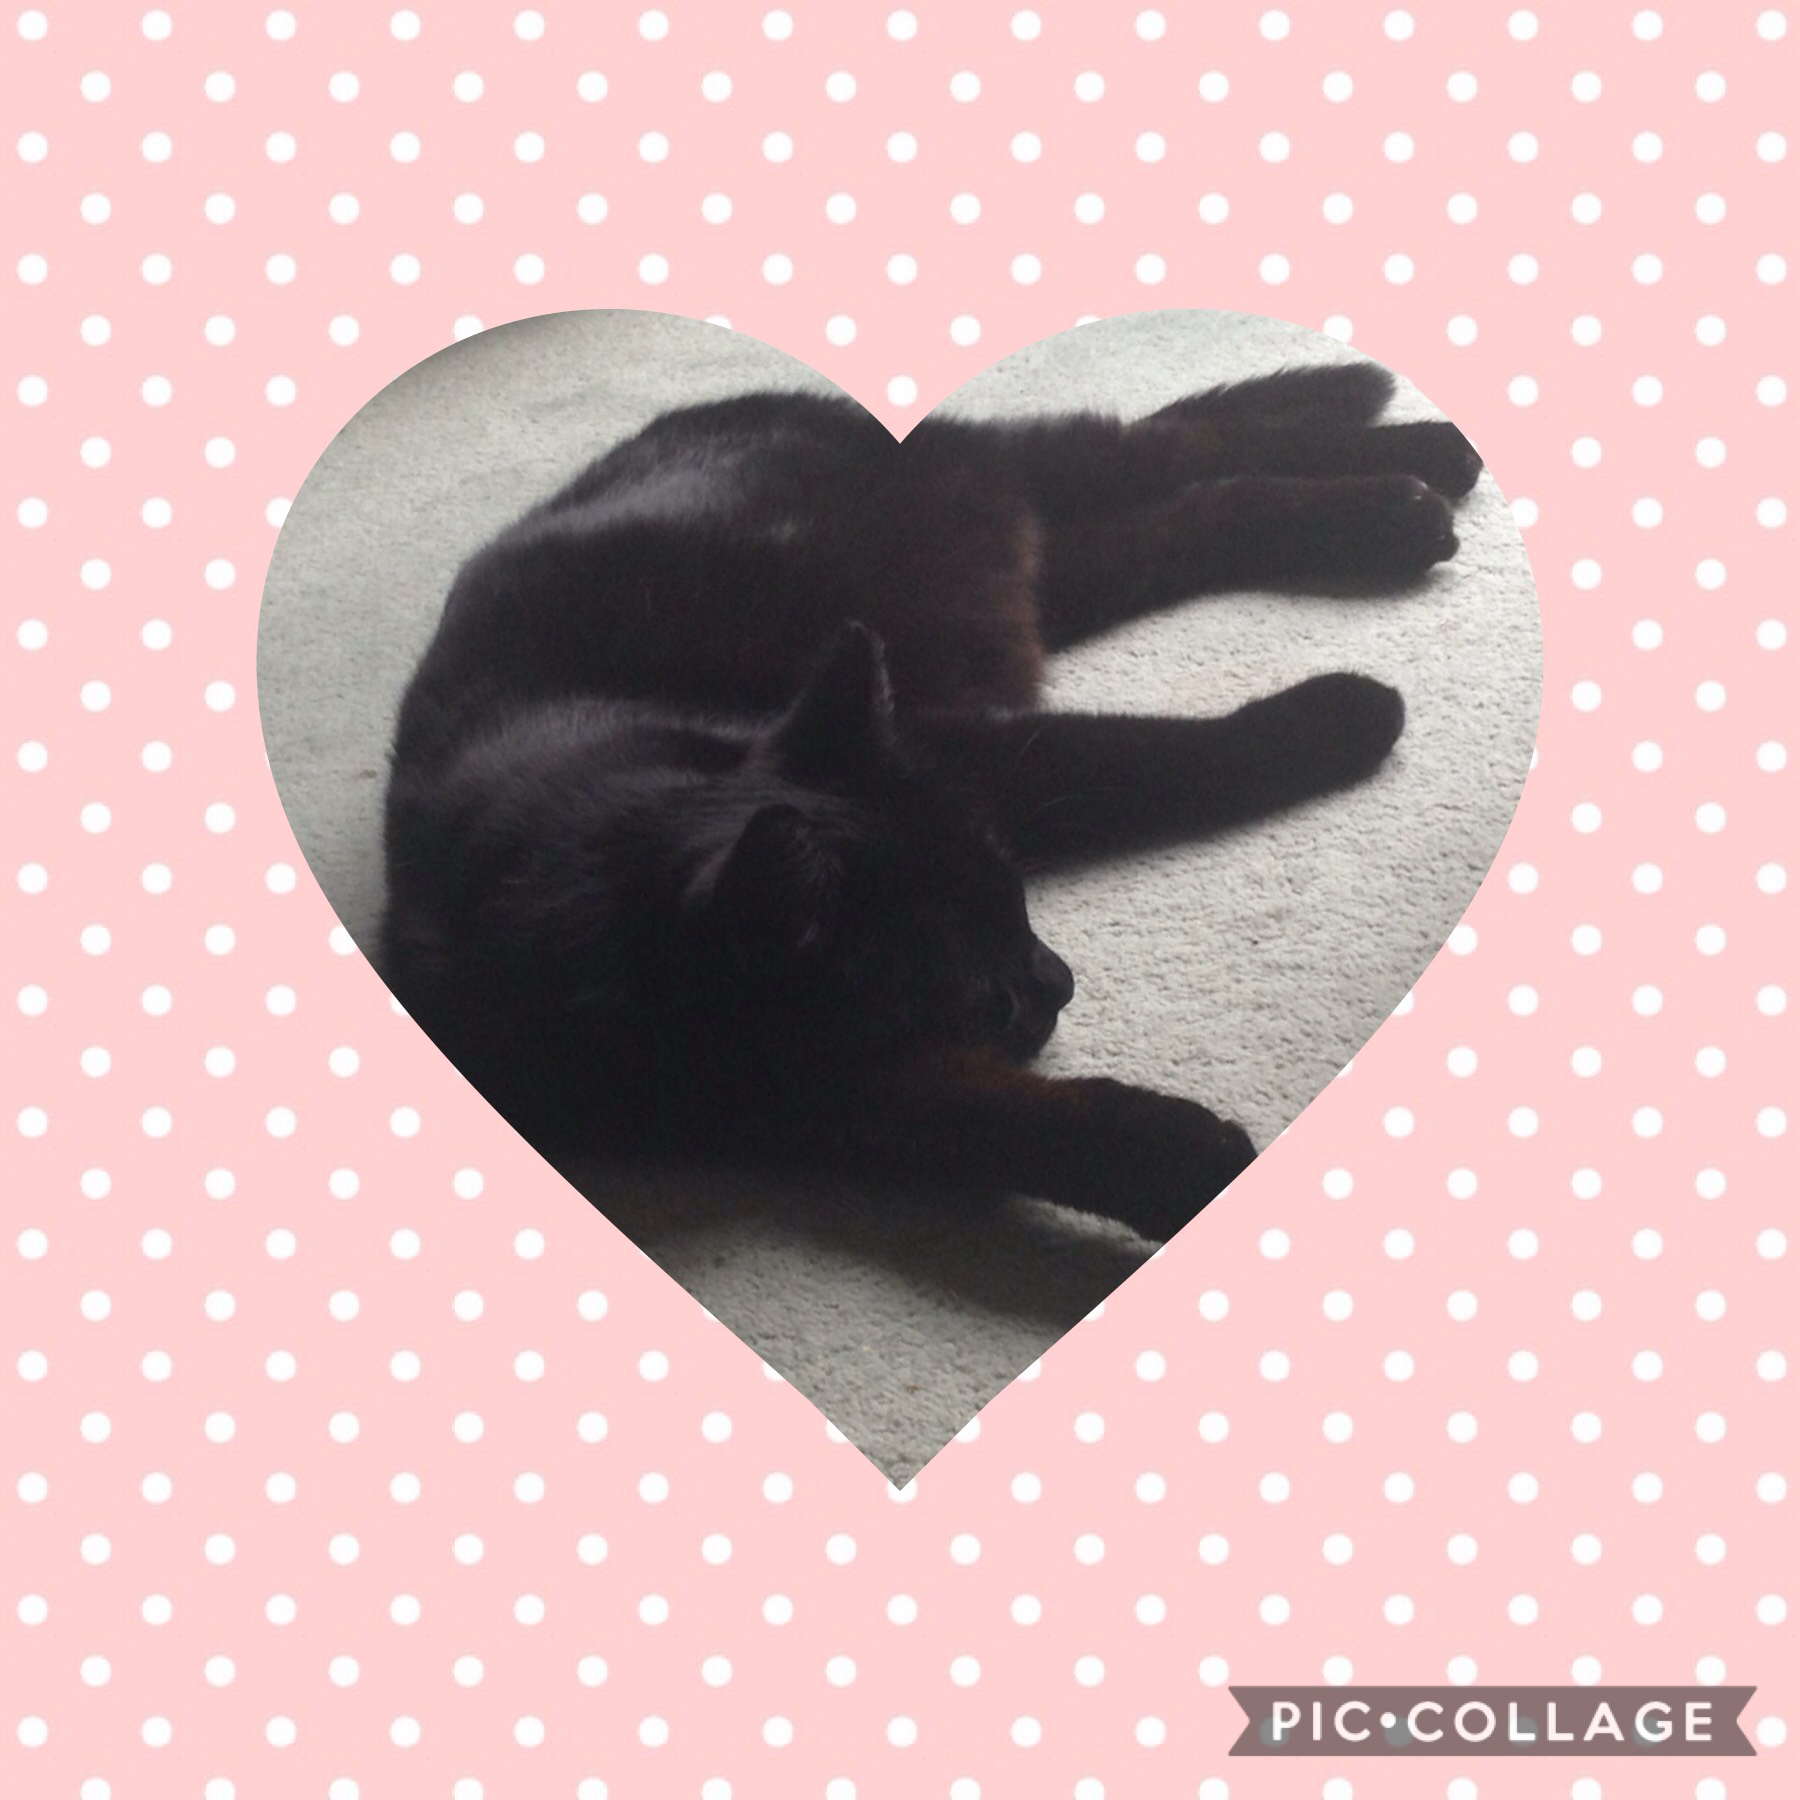 Here is my cat! Tappy
Comment or remix and like if you have a pet.